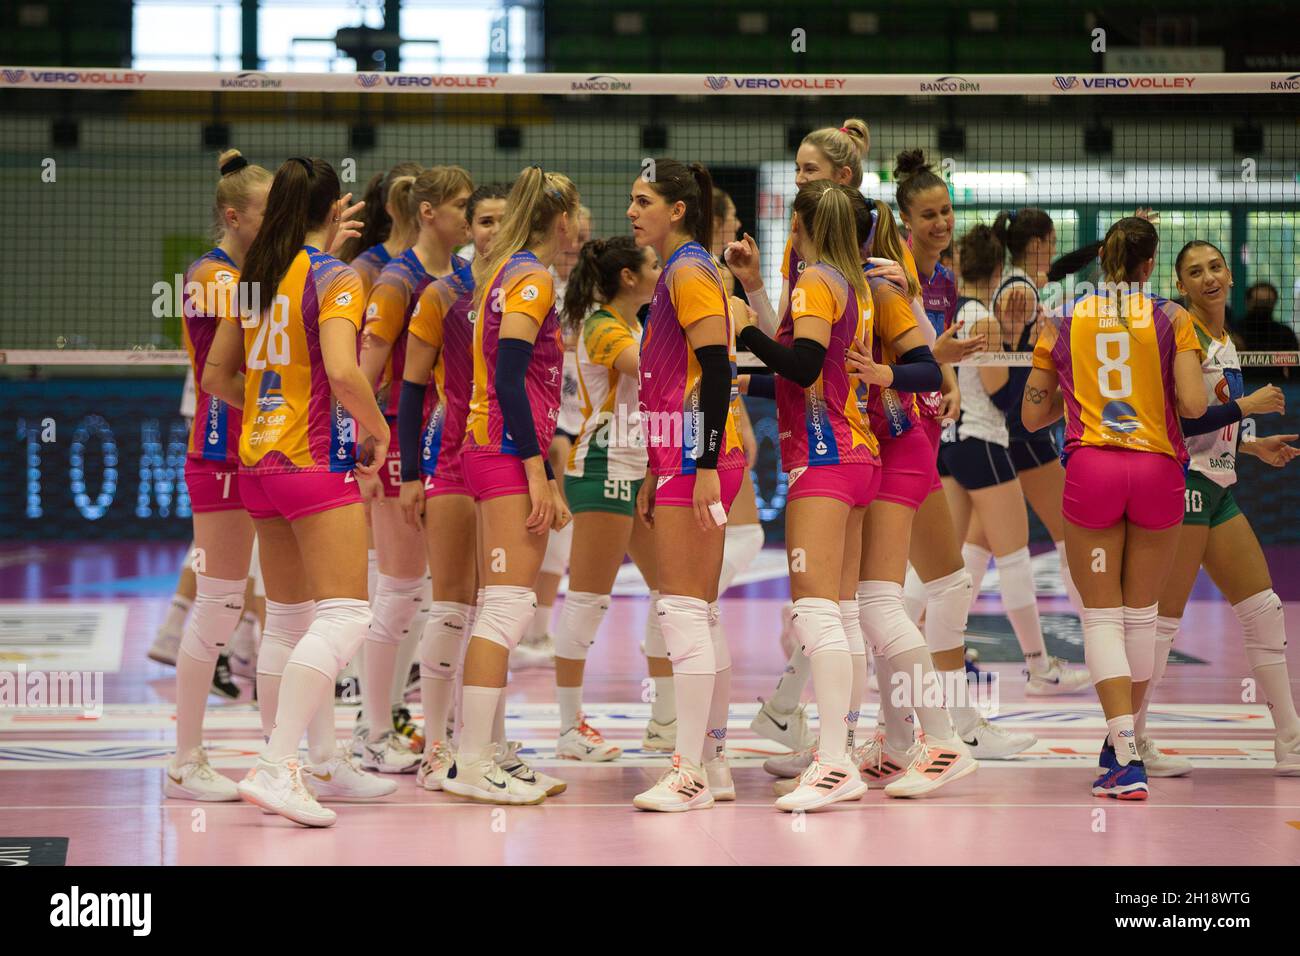 Vero Volley Monza players during Vero Volley Monza vs Reale Mutua Fenera Chieri, Volleyball Italian Serie A1 Women match in Monza (MB), Italy, October 17 2021 Stock Photo